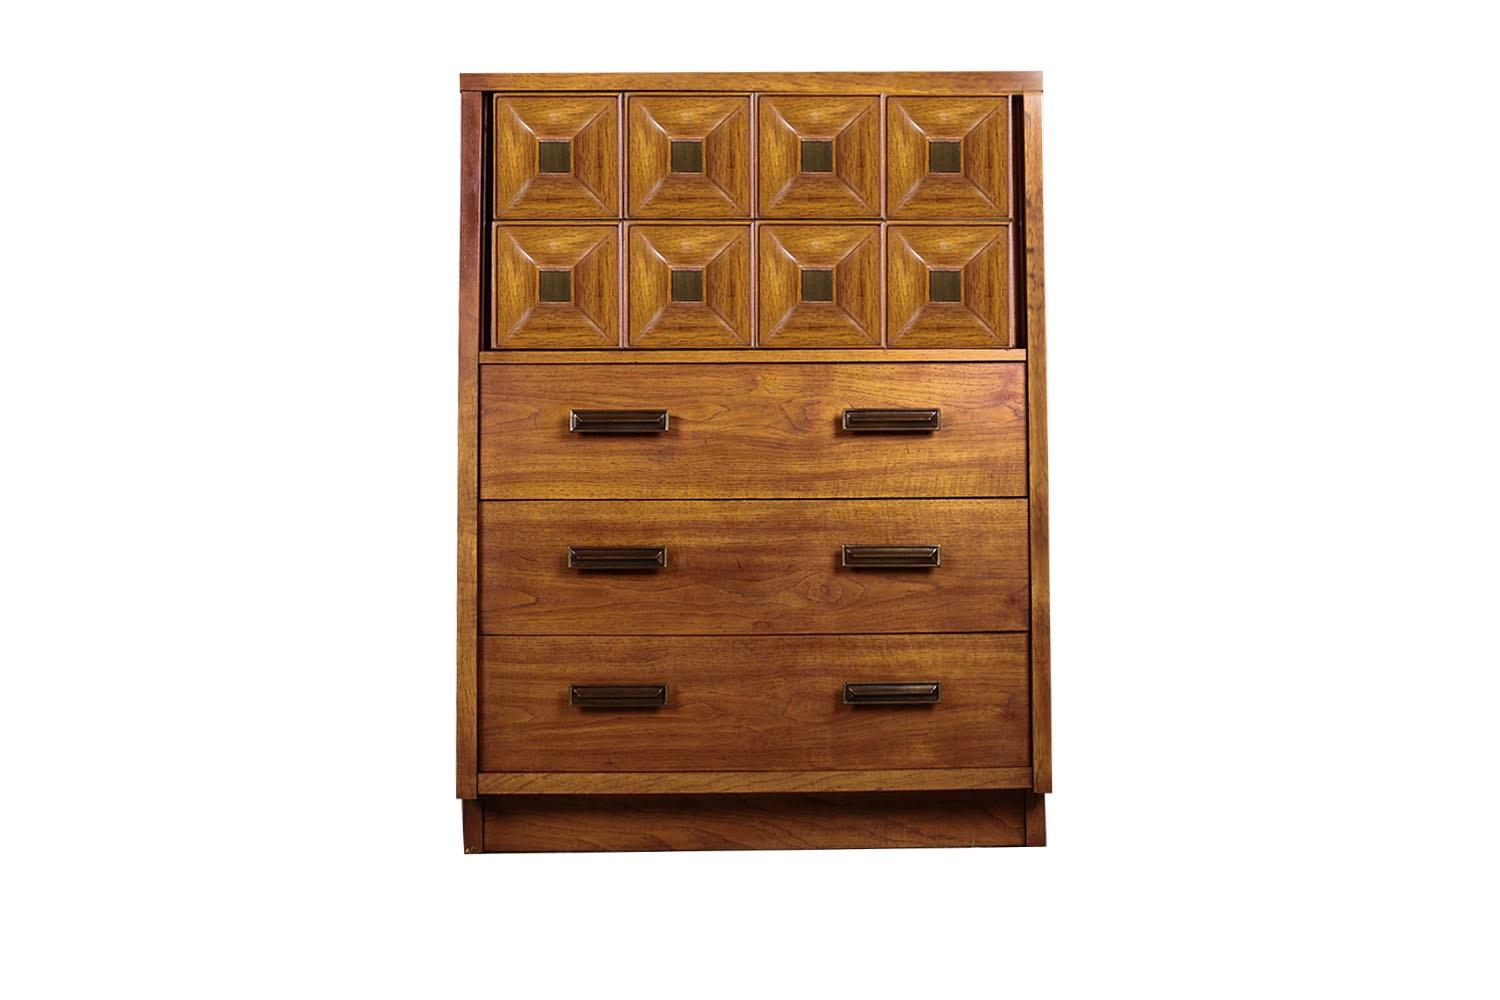 Extraordinary, rare Mid-Century Modern Graphical Geometric tall five drawer dresser by Lane Furniture. Features heavy solid wood construction. Ample storage capability, with a bank of five spacious, large drawers. Maker’s stamp (Lane Altavista,